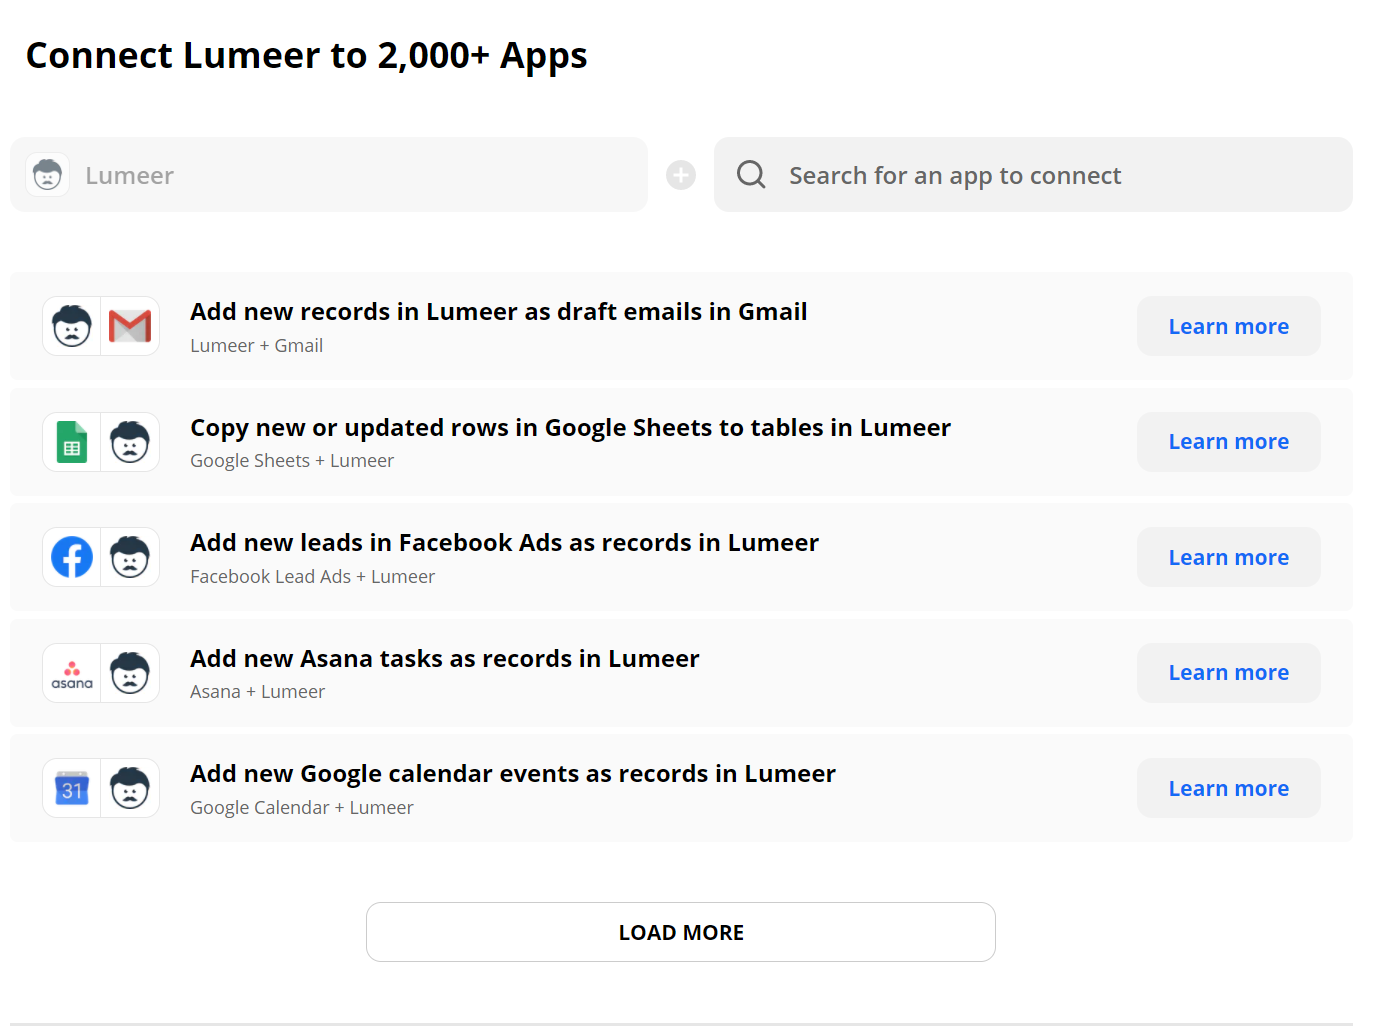 connect Lumeer to 2000+ apps using zapier integrations